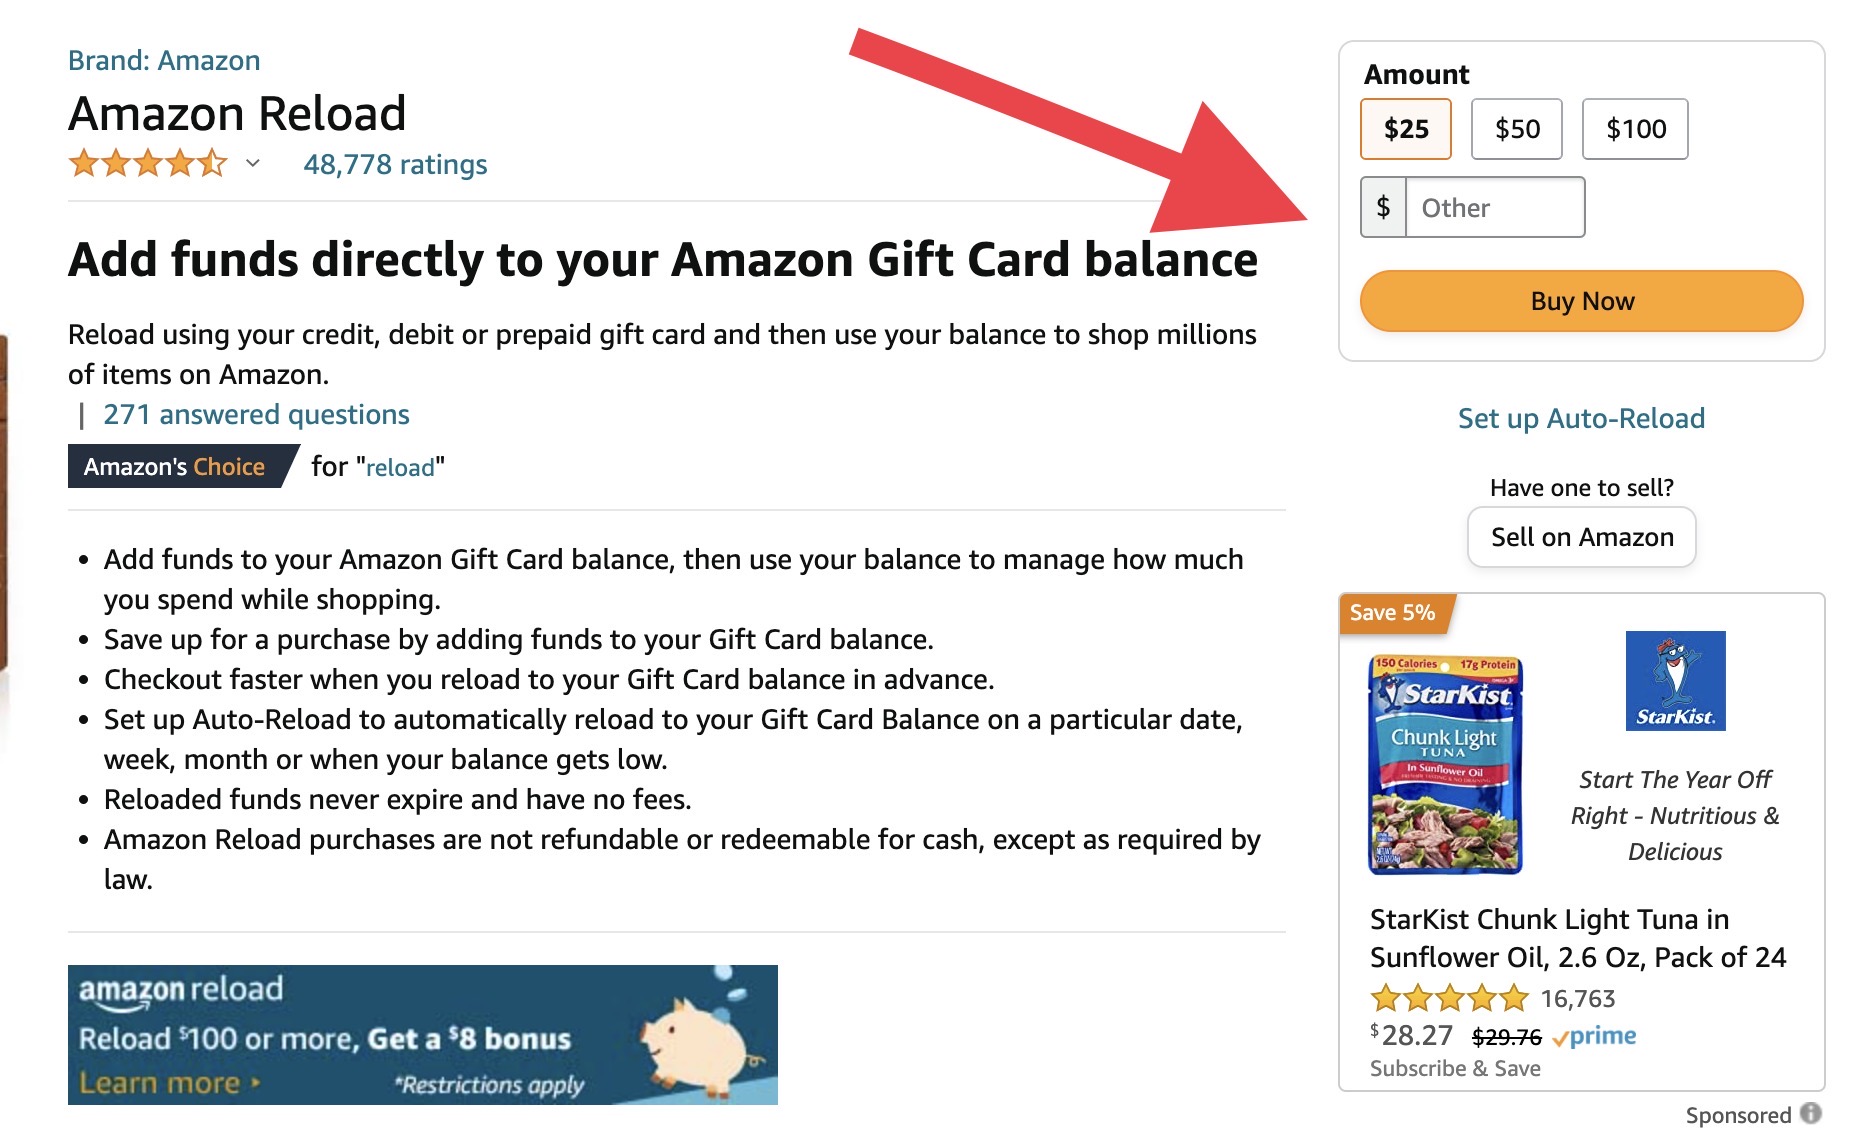 Are Visa Gift Cards Off Amazon Physical or a Code?